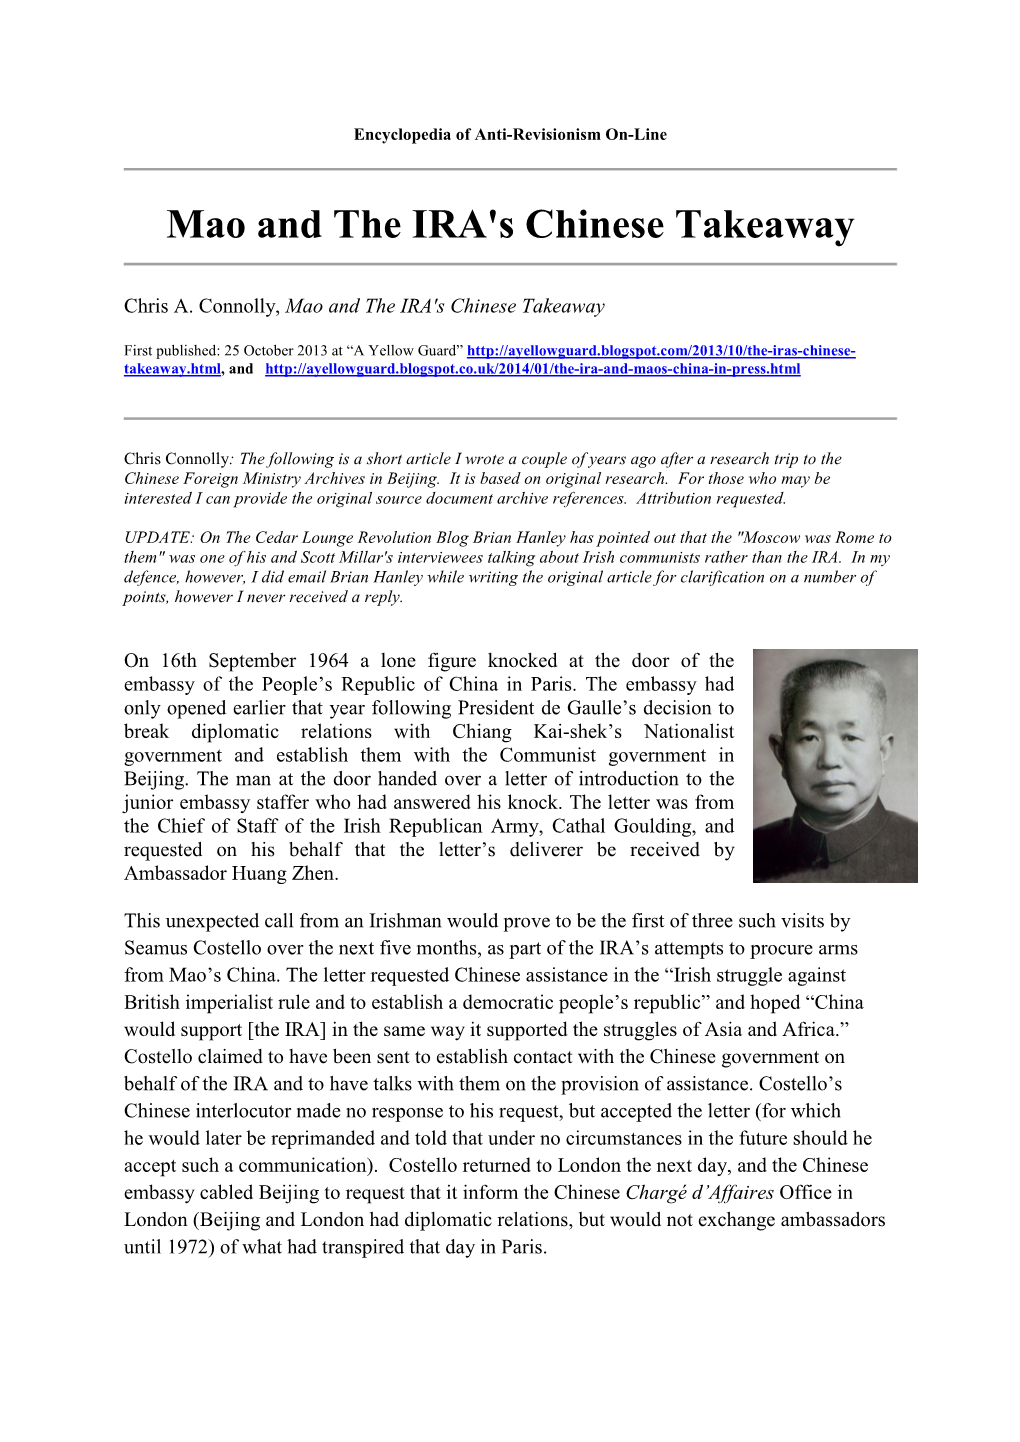 Mao and the IRA's Chinese Takeaway